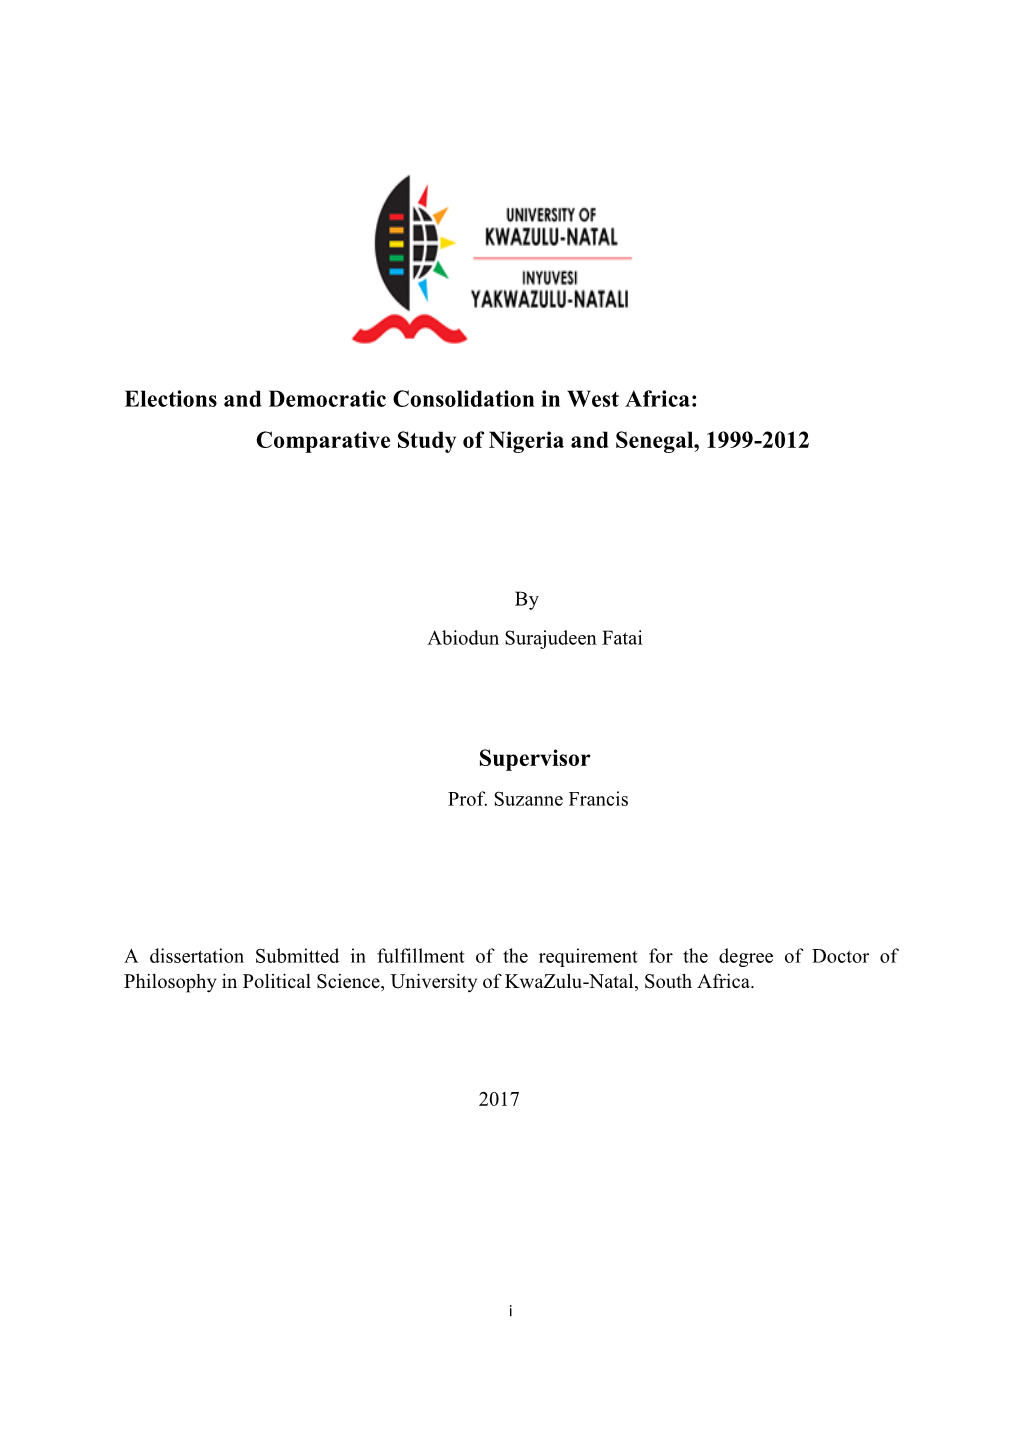 Elections and Democratic Consolidation in West Africa: Comparative Study of Nigeria and Senegal, 1999-2012